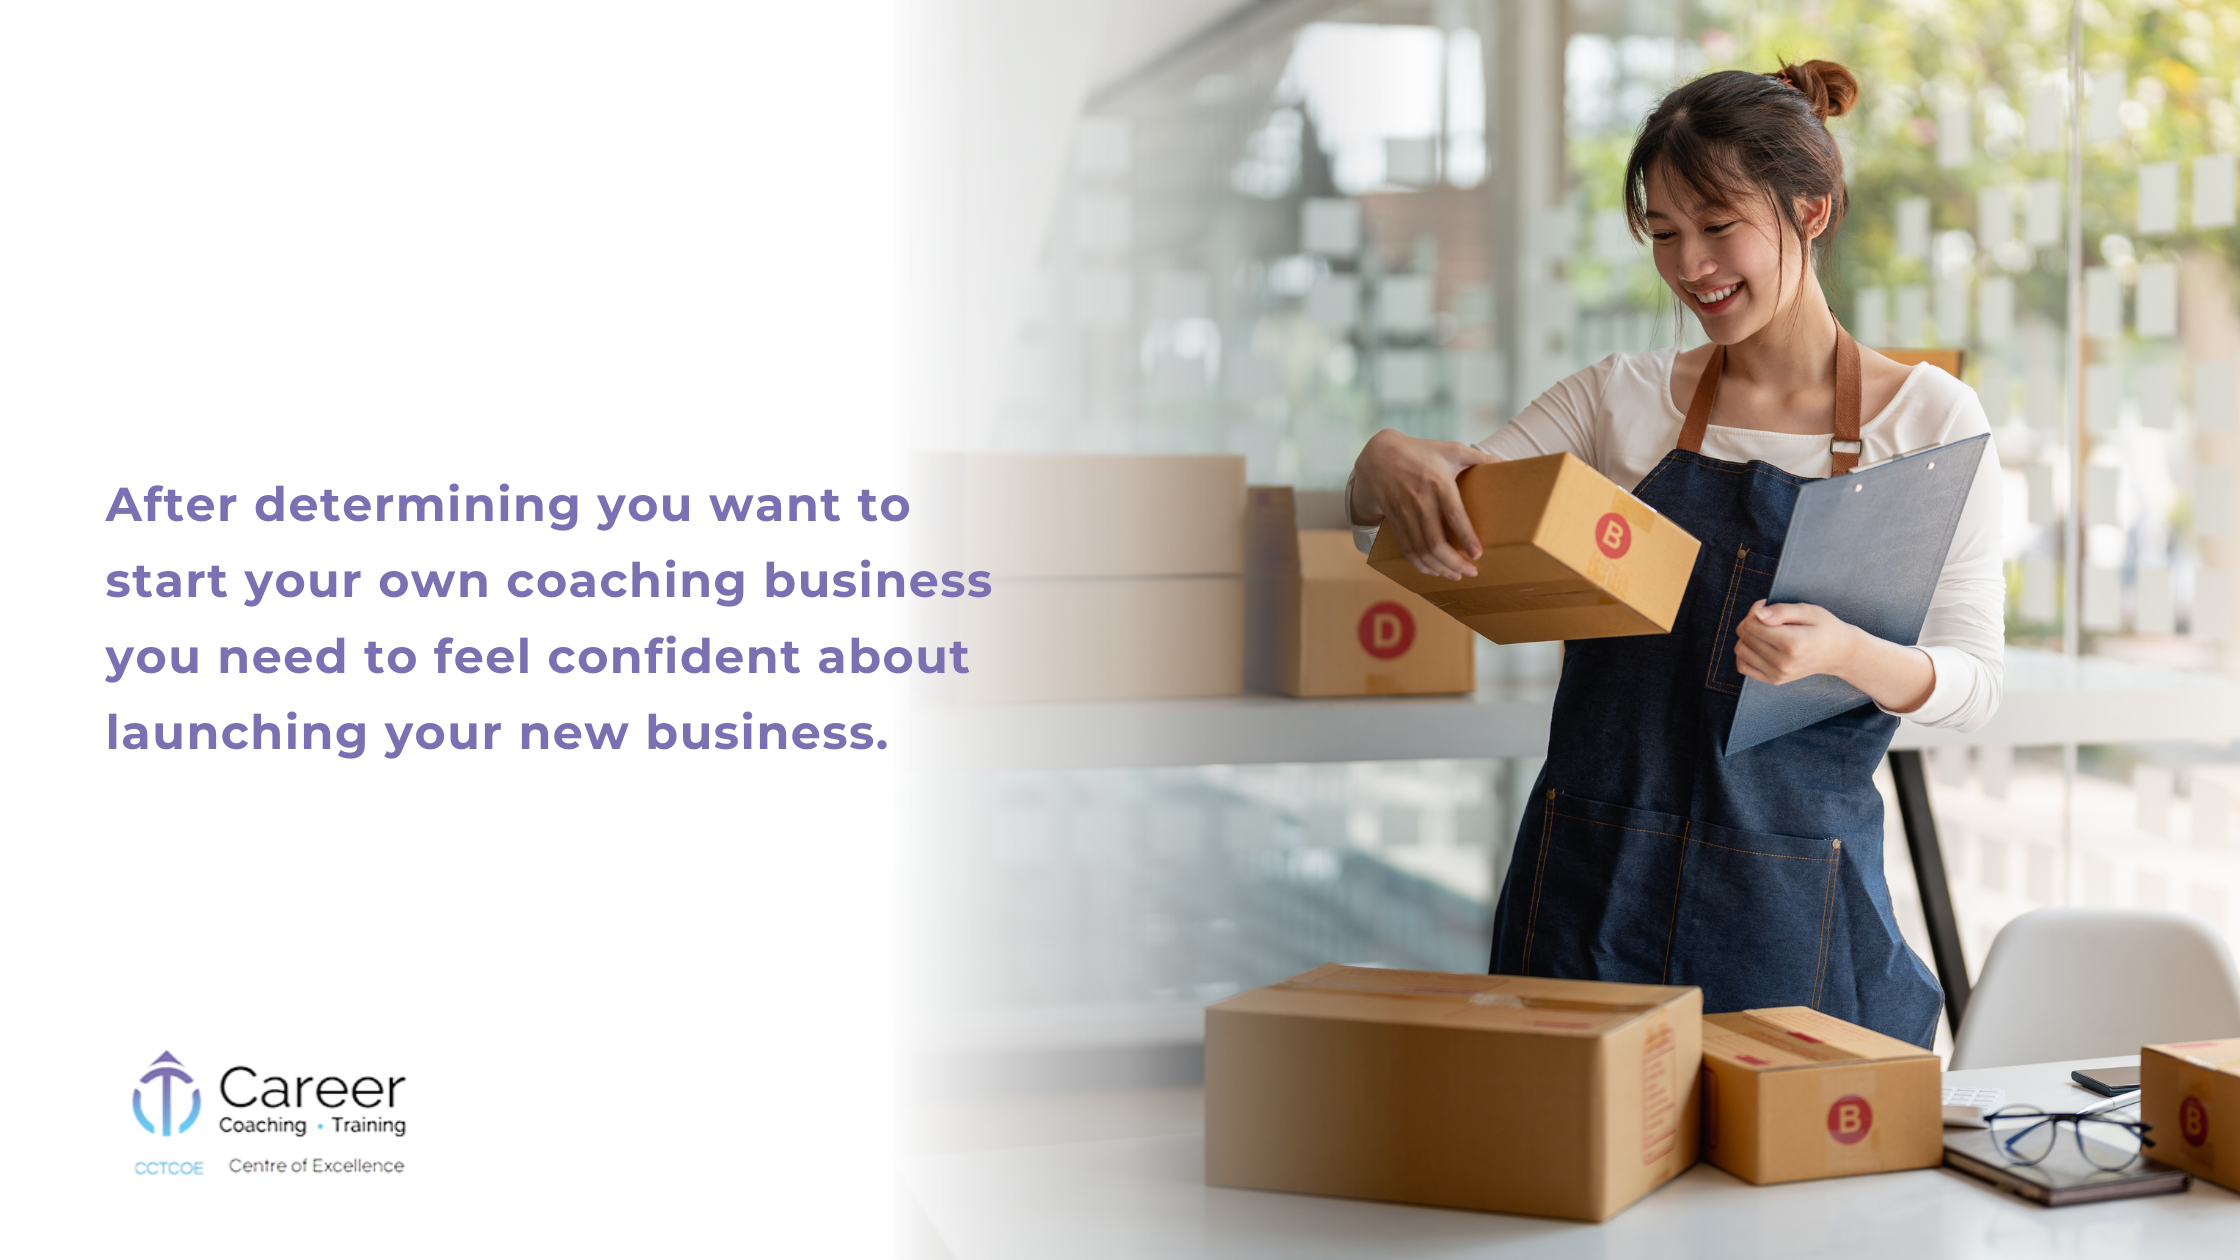 After determining you want to start your own coaching business you need to feel confident about launching your new business.